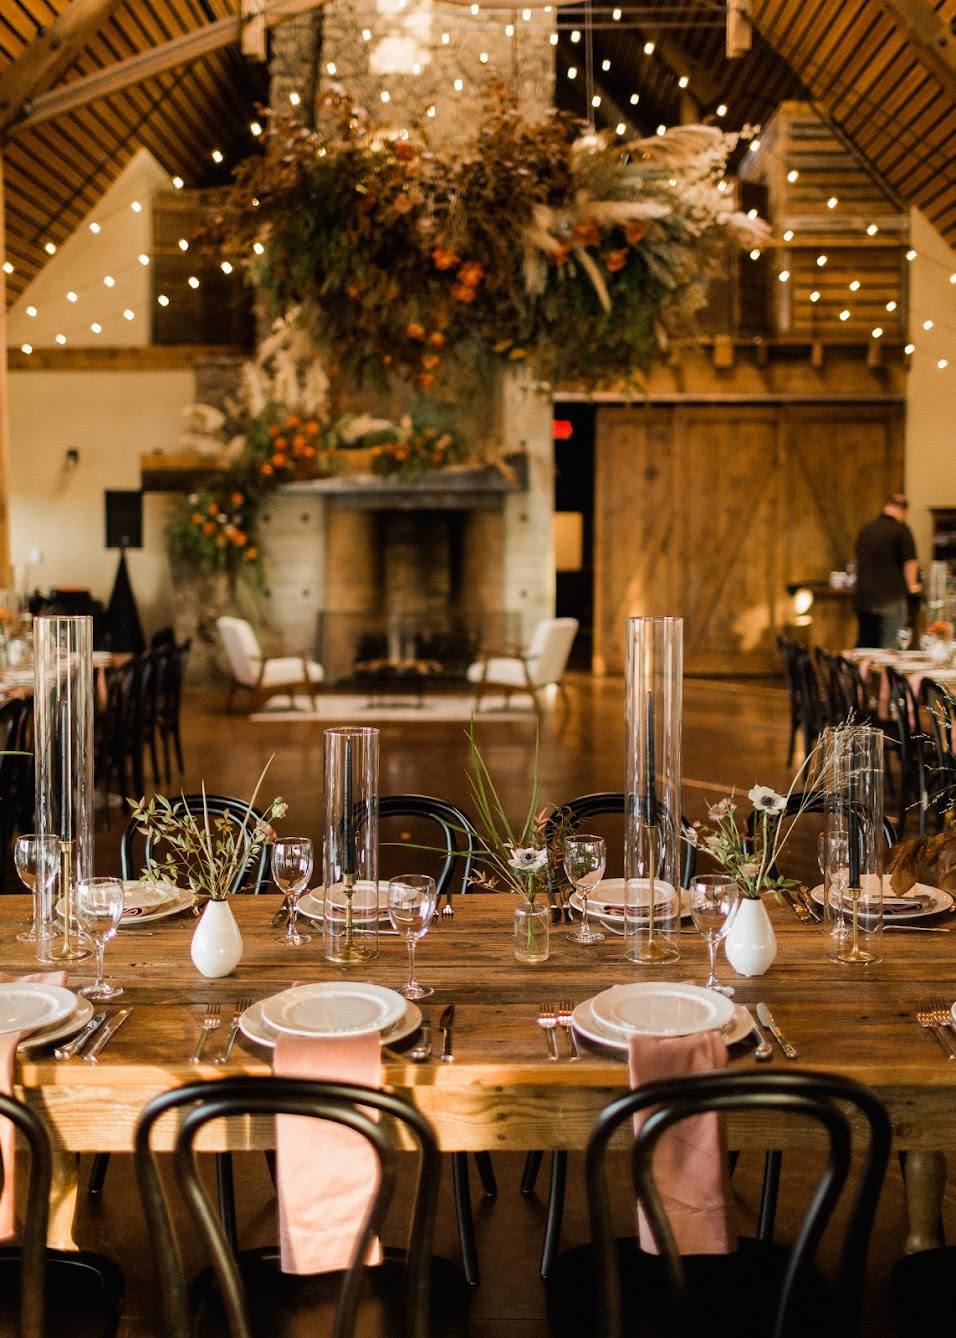 Farm tables are set with velvet pink napkins draped over the table sitting between the dinner and salad plate. Tall black taper candles with a glass chimney around them, in between each candles sits a small bud vase.